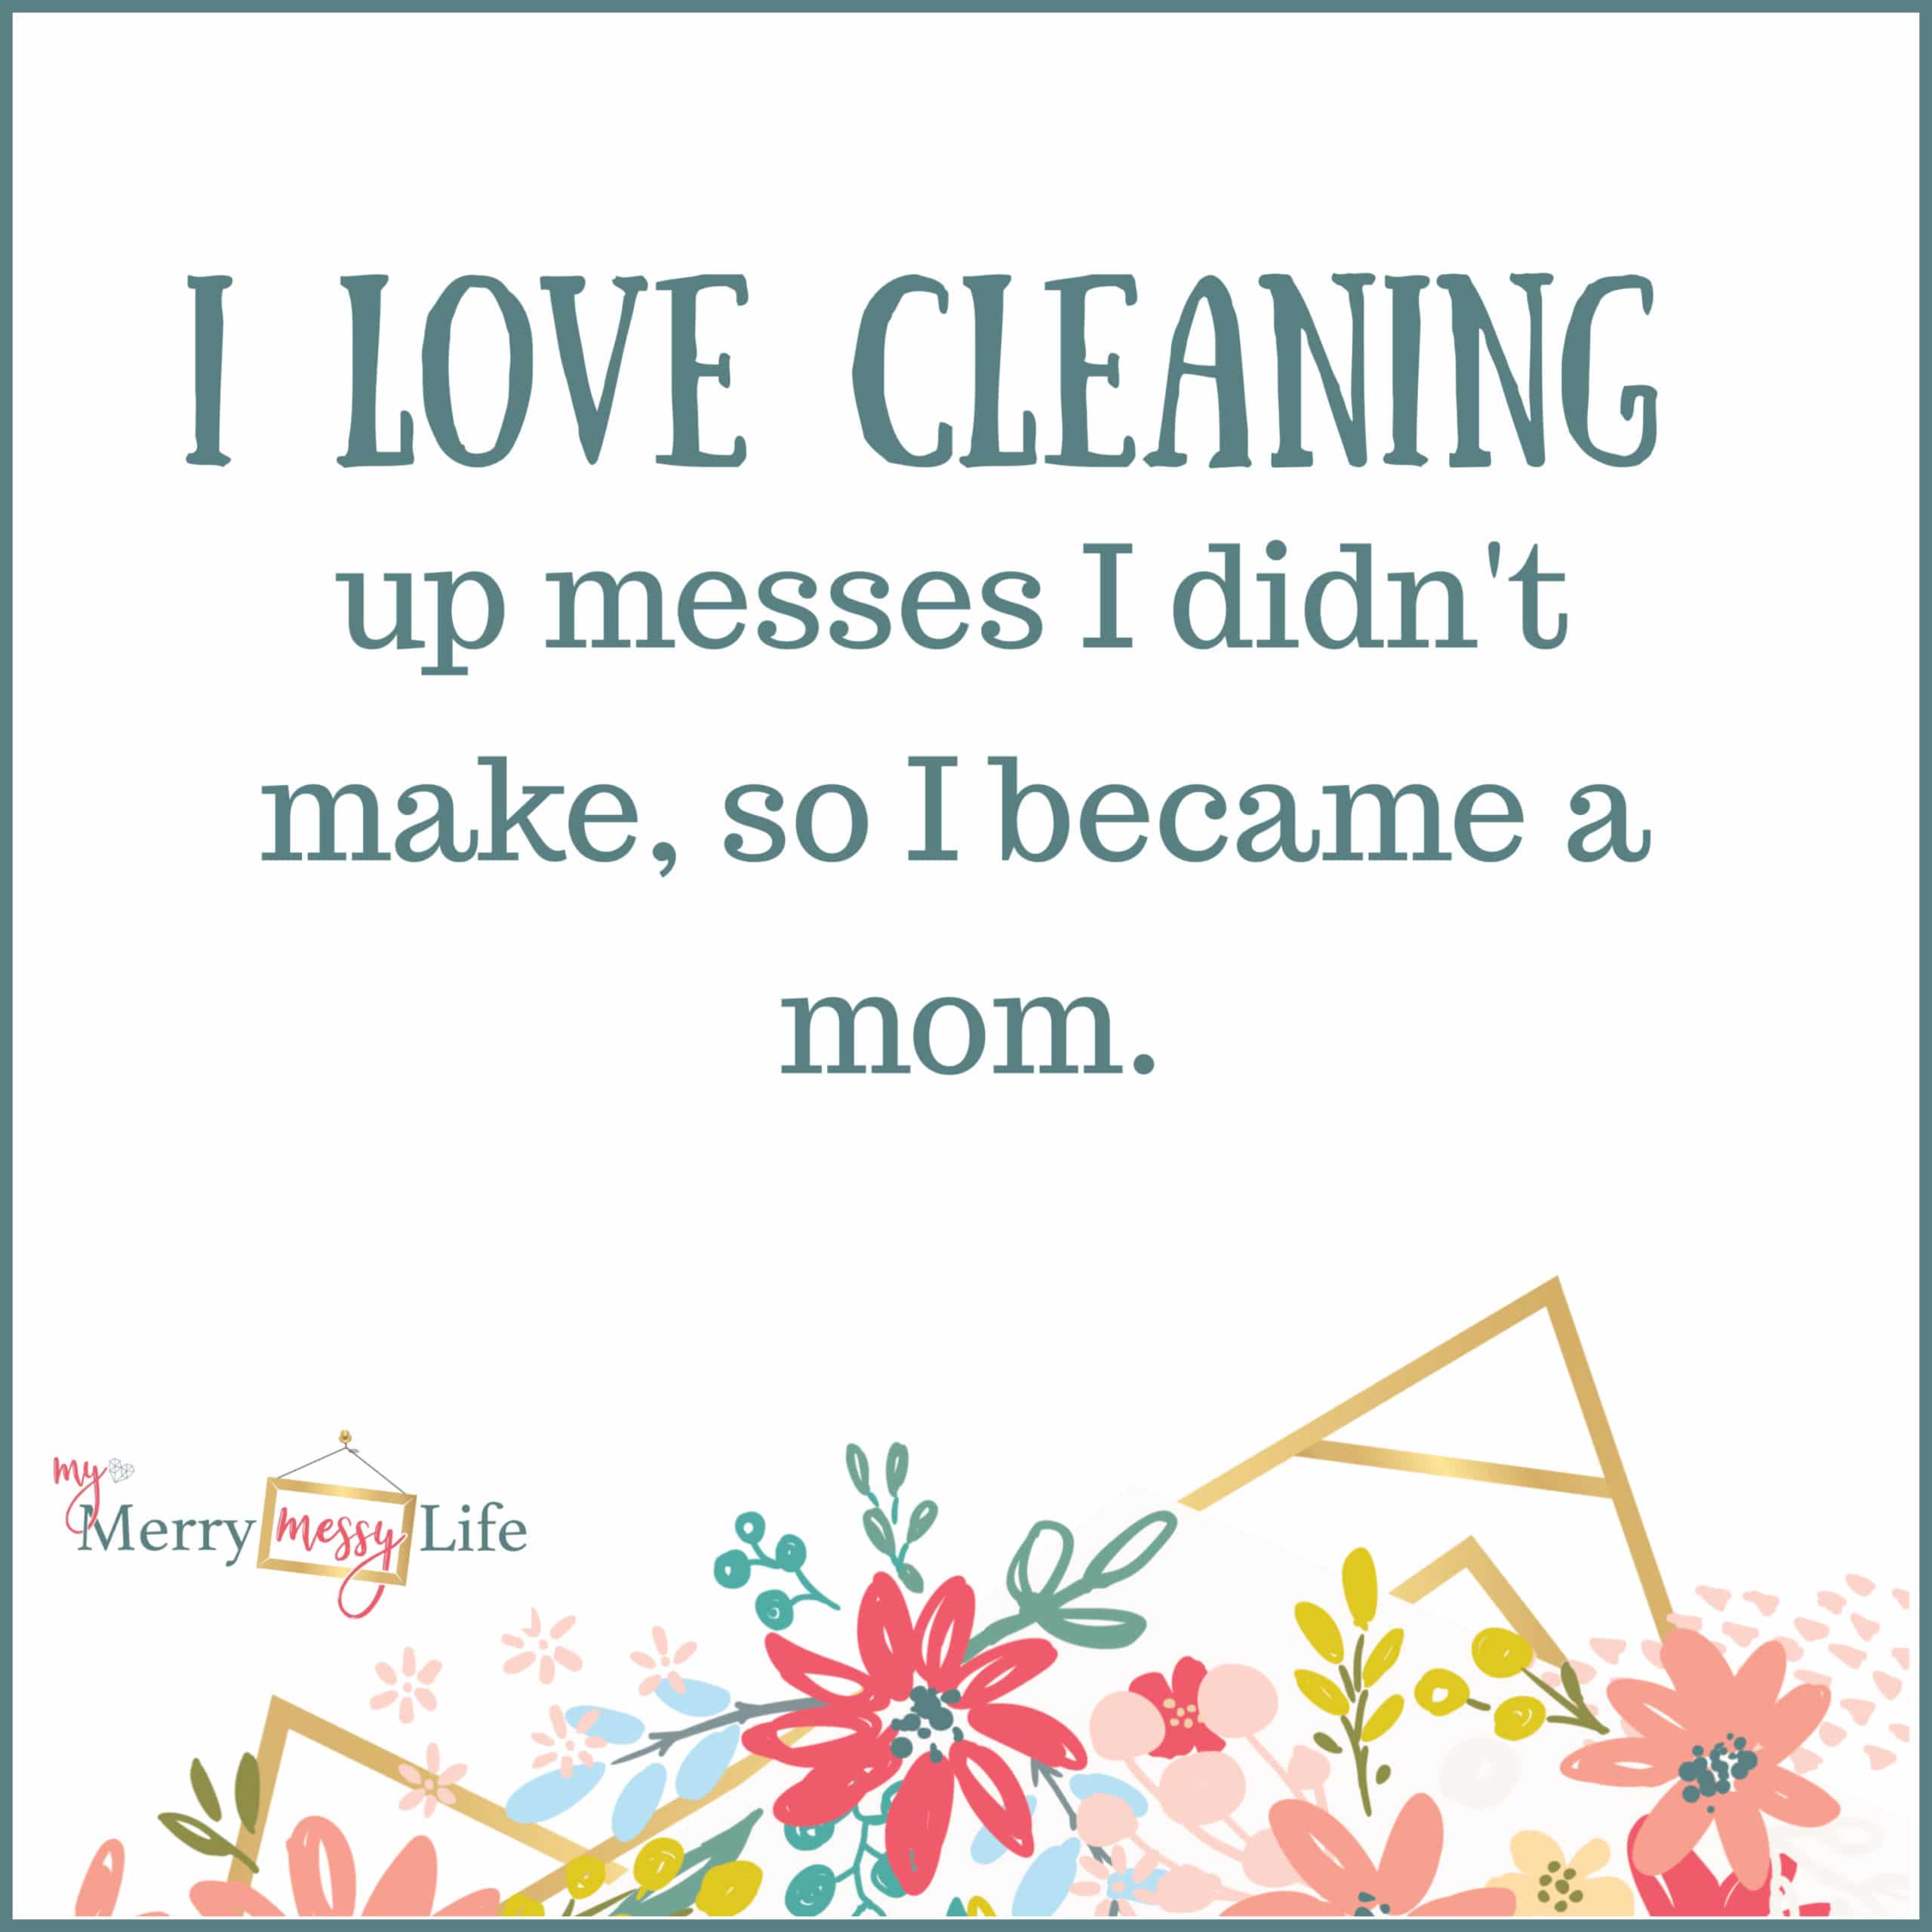 Funny Memes about #momlife – My Merry Messy Life